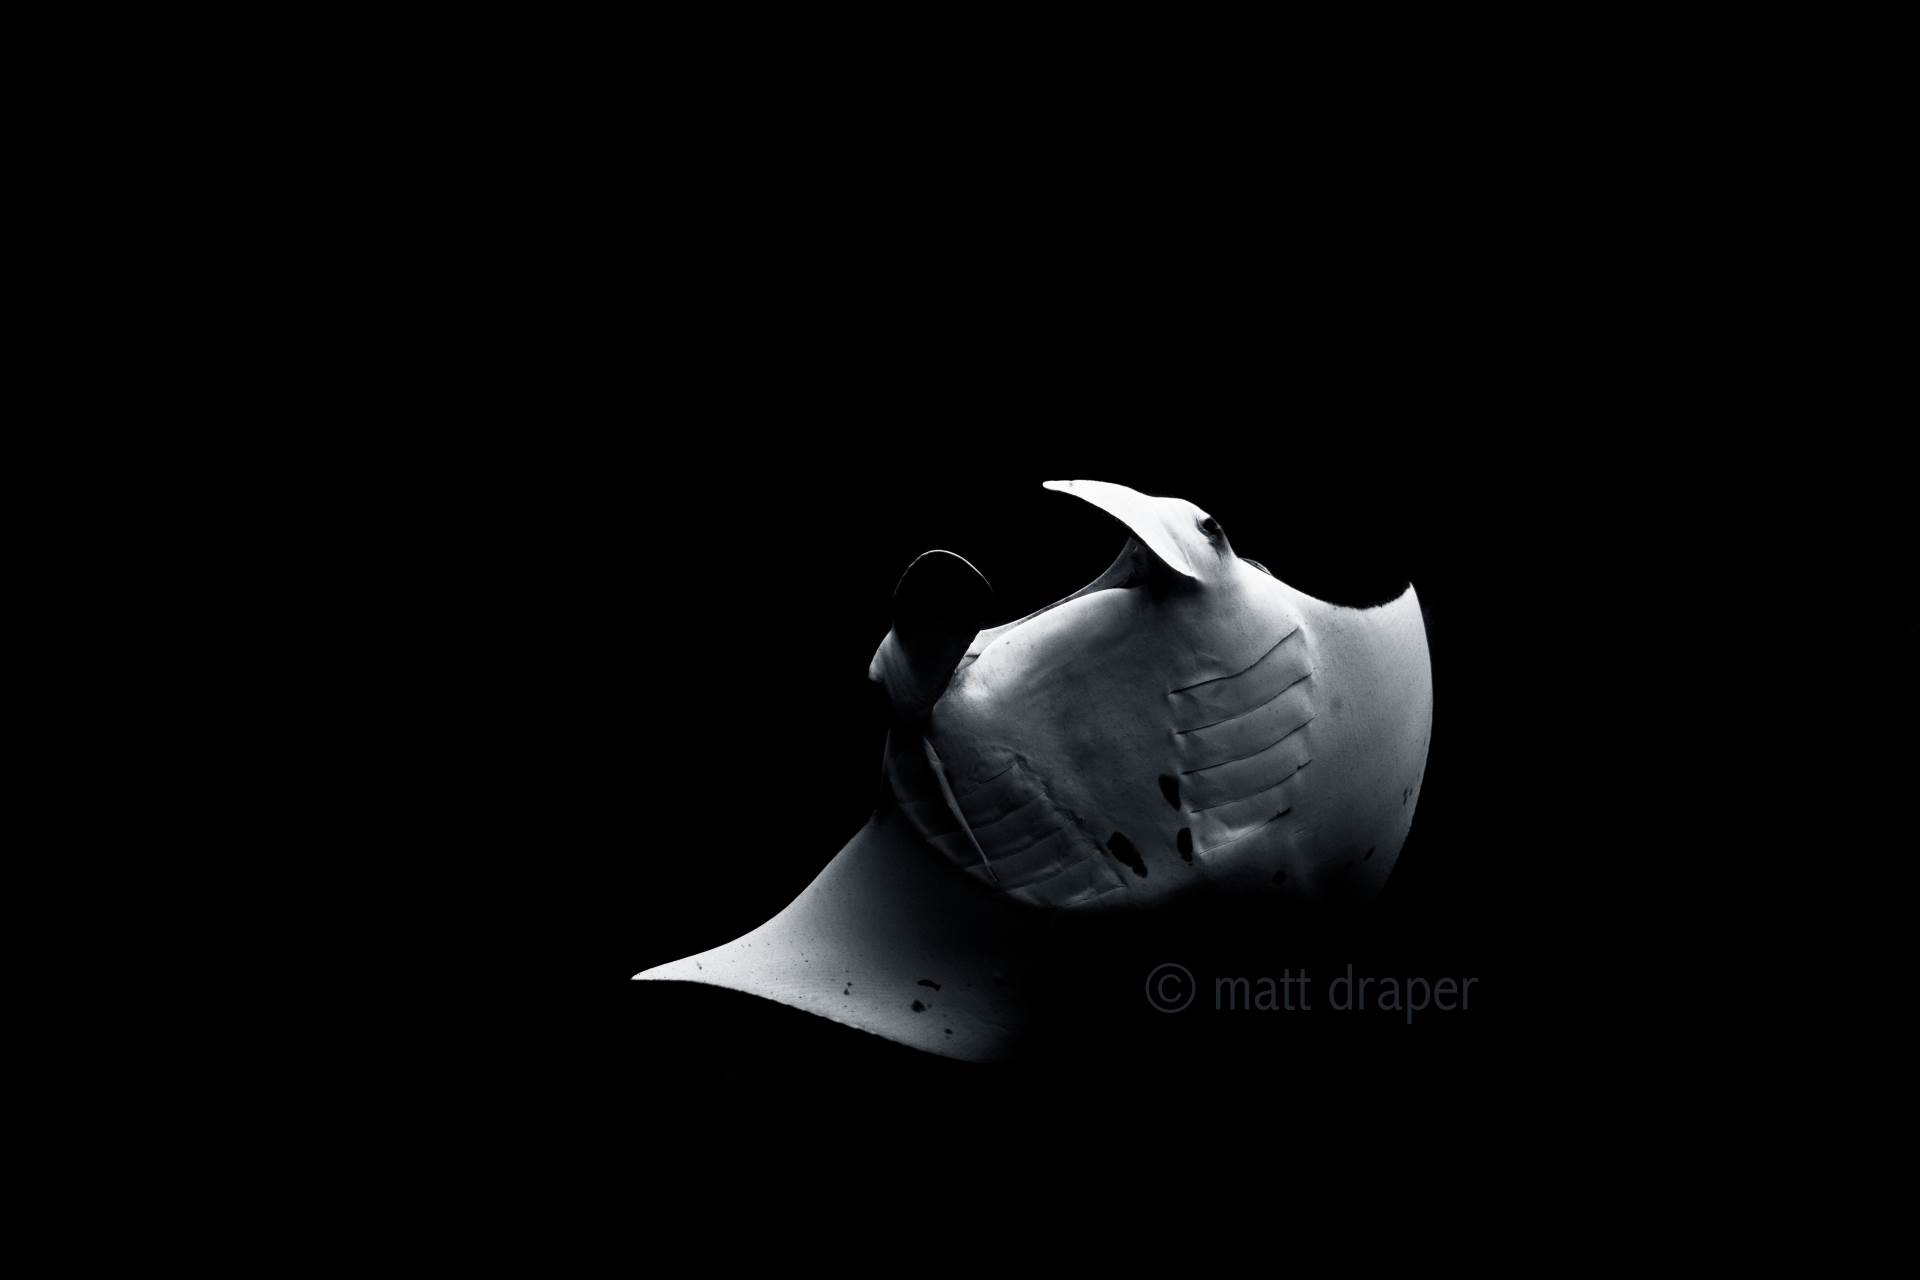 An incredible interaction with this male Manta ray today at my local dive site of Julian Rocks, Byron Bay. I spent close to an hour free diving with this amazing being in about 10m of water. I captured this image under natural light then removed all colour. www.mattdraperphotography.com